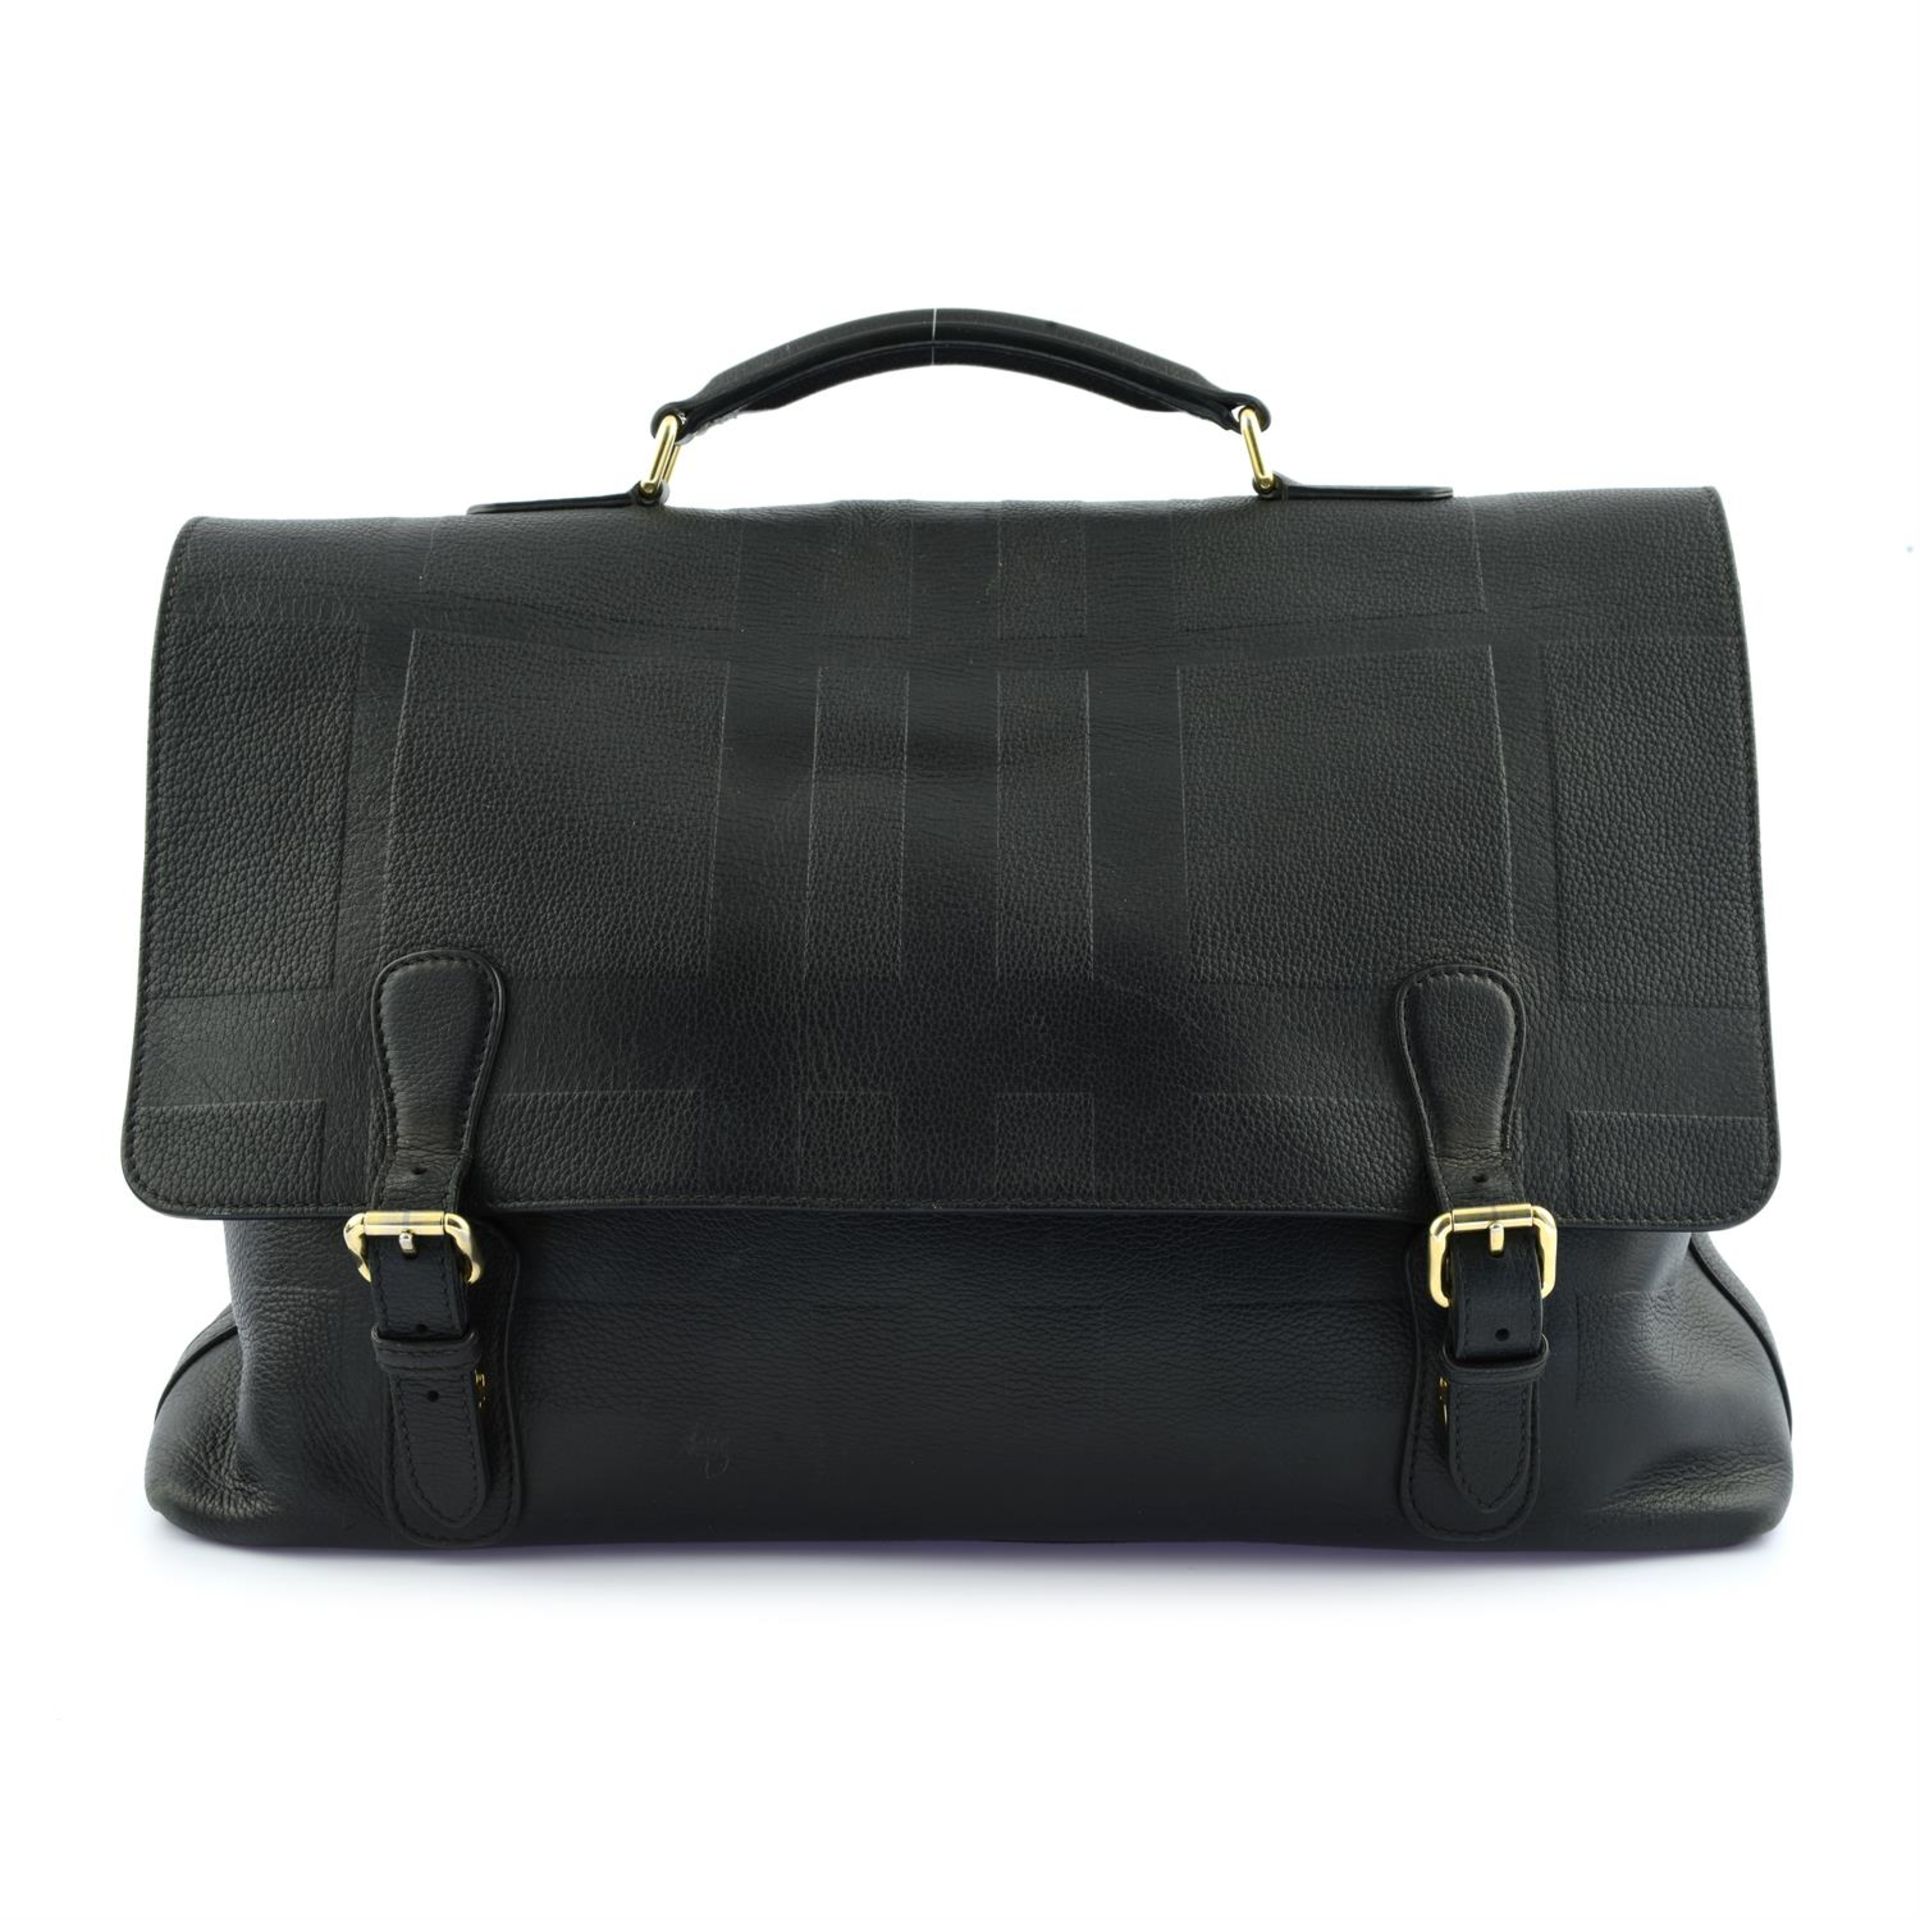 BURBERRY - a black embossed leather satchel.